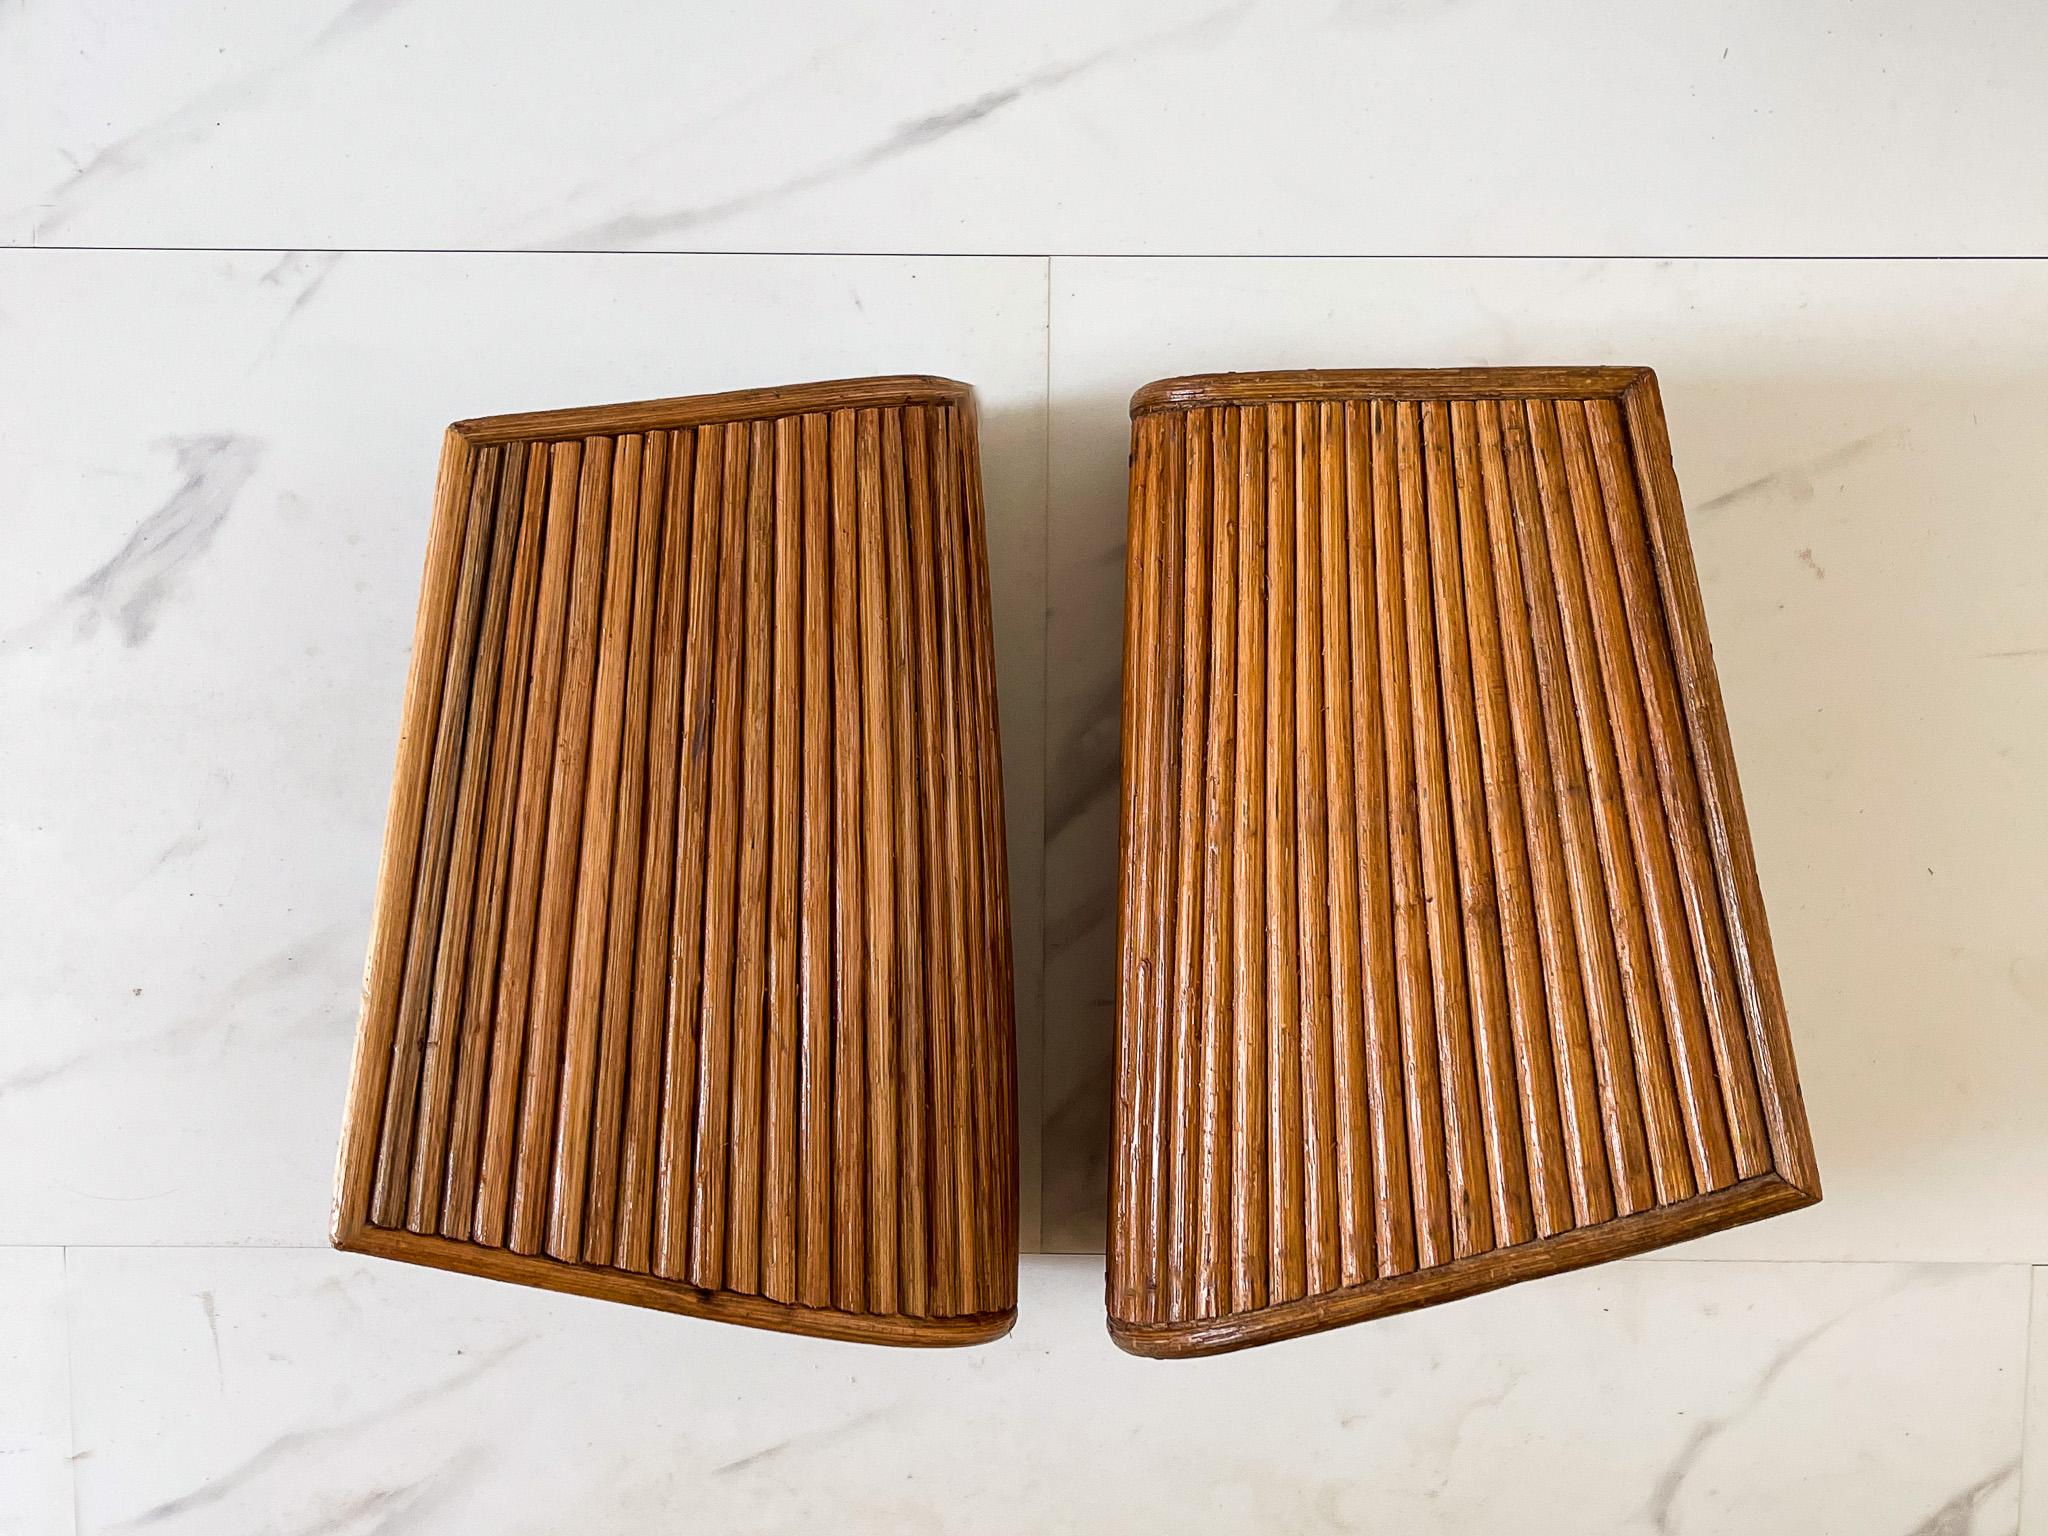 A Pair of Pencil Reed Rattan Wall Sconce Lamp, Mid Century Modern In New Condition For Sale In Oxford, GB